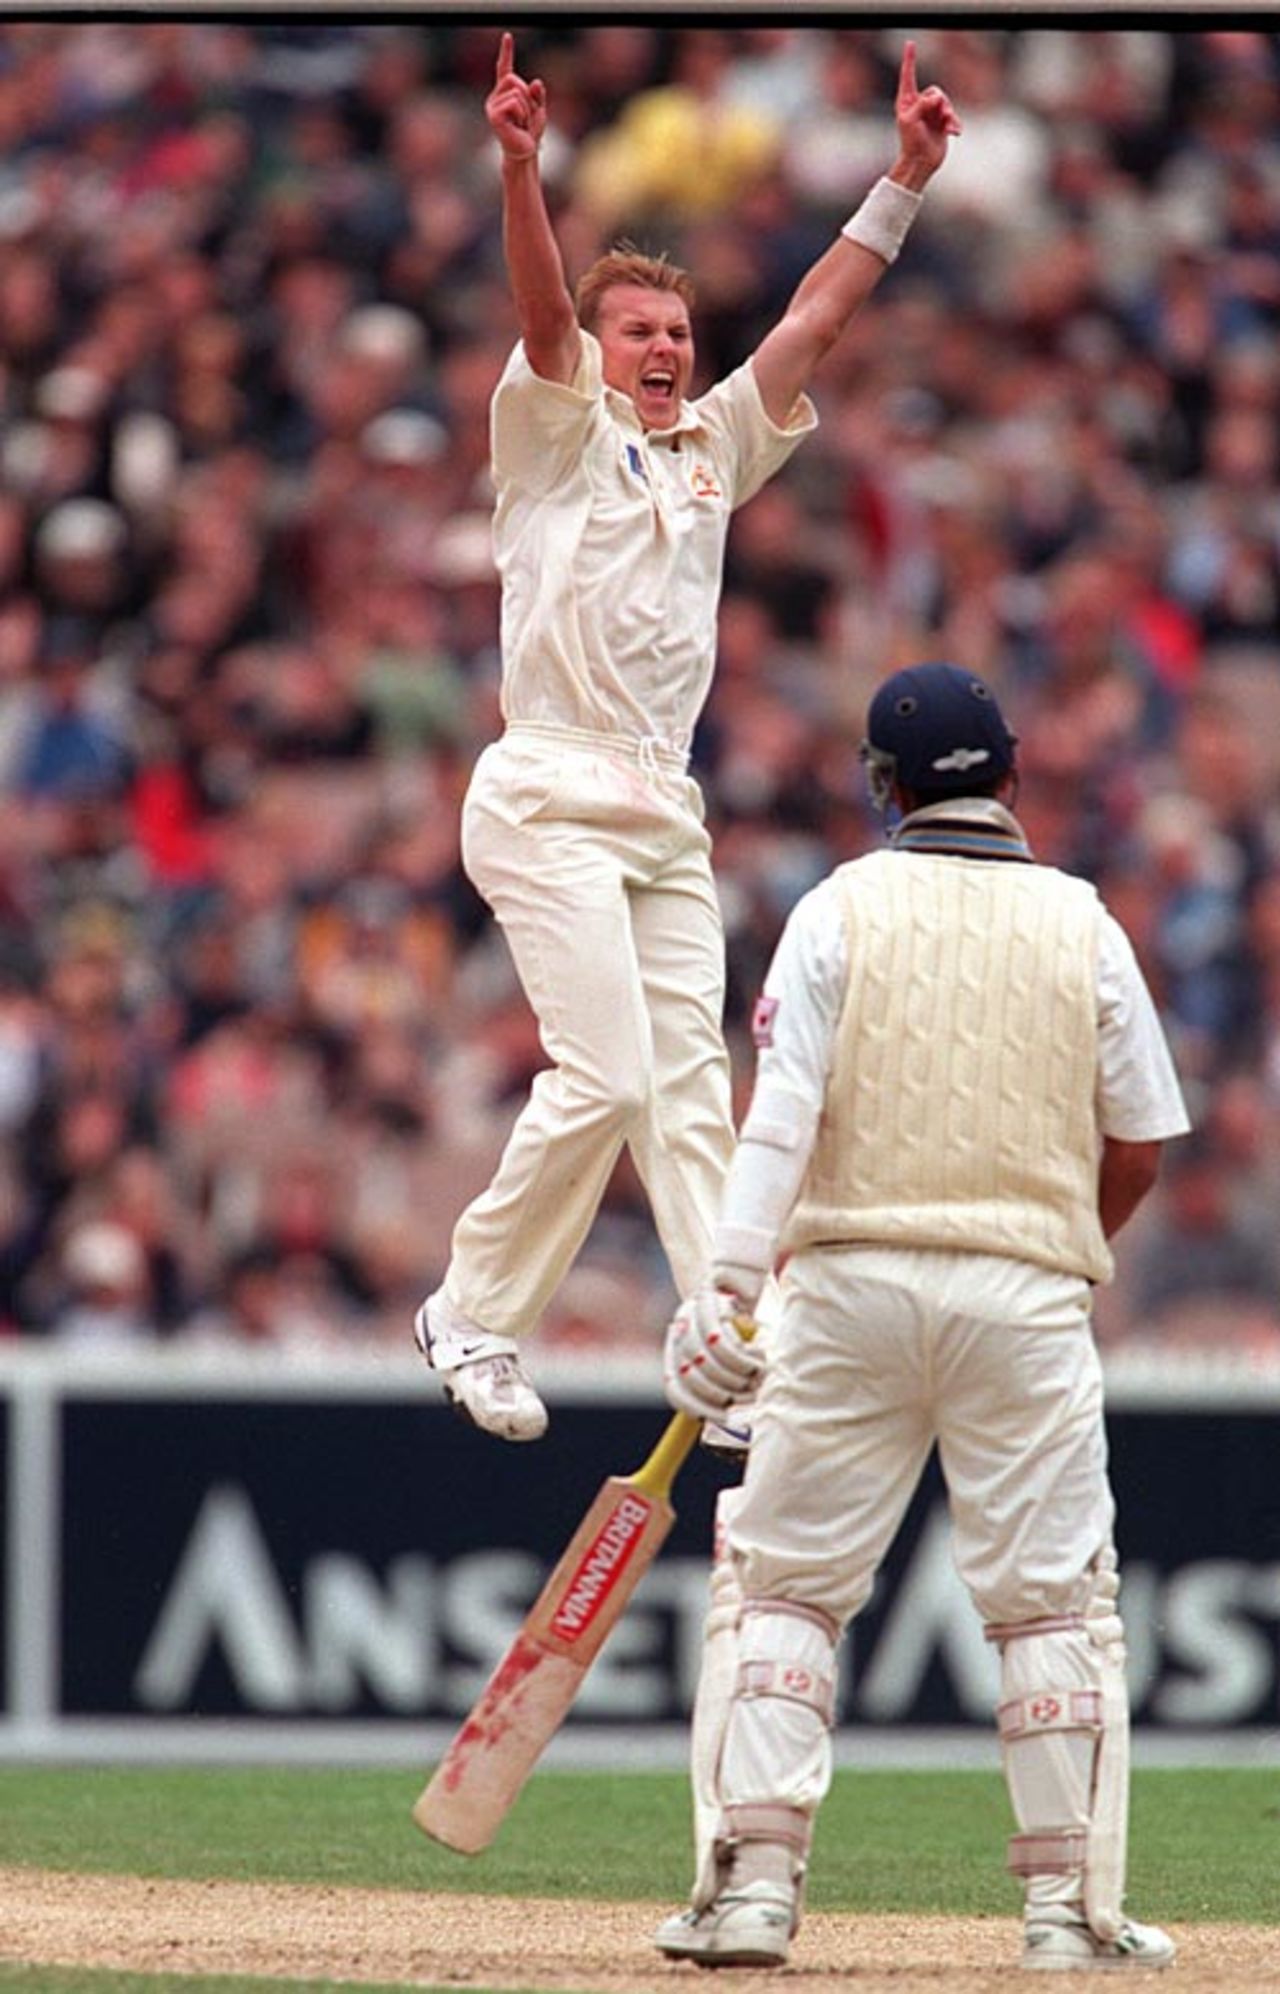 Brett Lee is ecstatic after getting Rahul Dravid out, Australia v India, 2nd Test, Melbourne, 3rd day, December 28, 1999